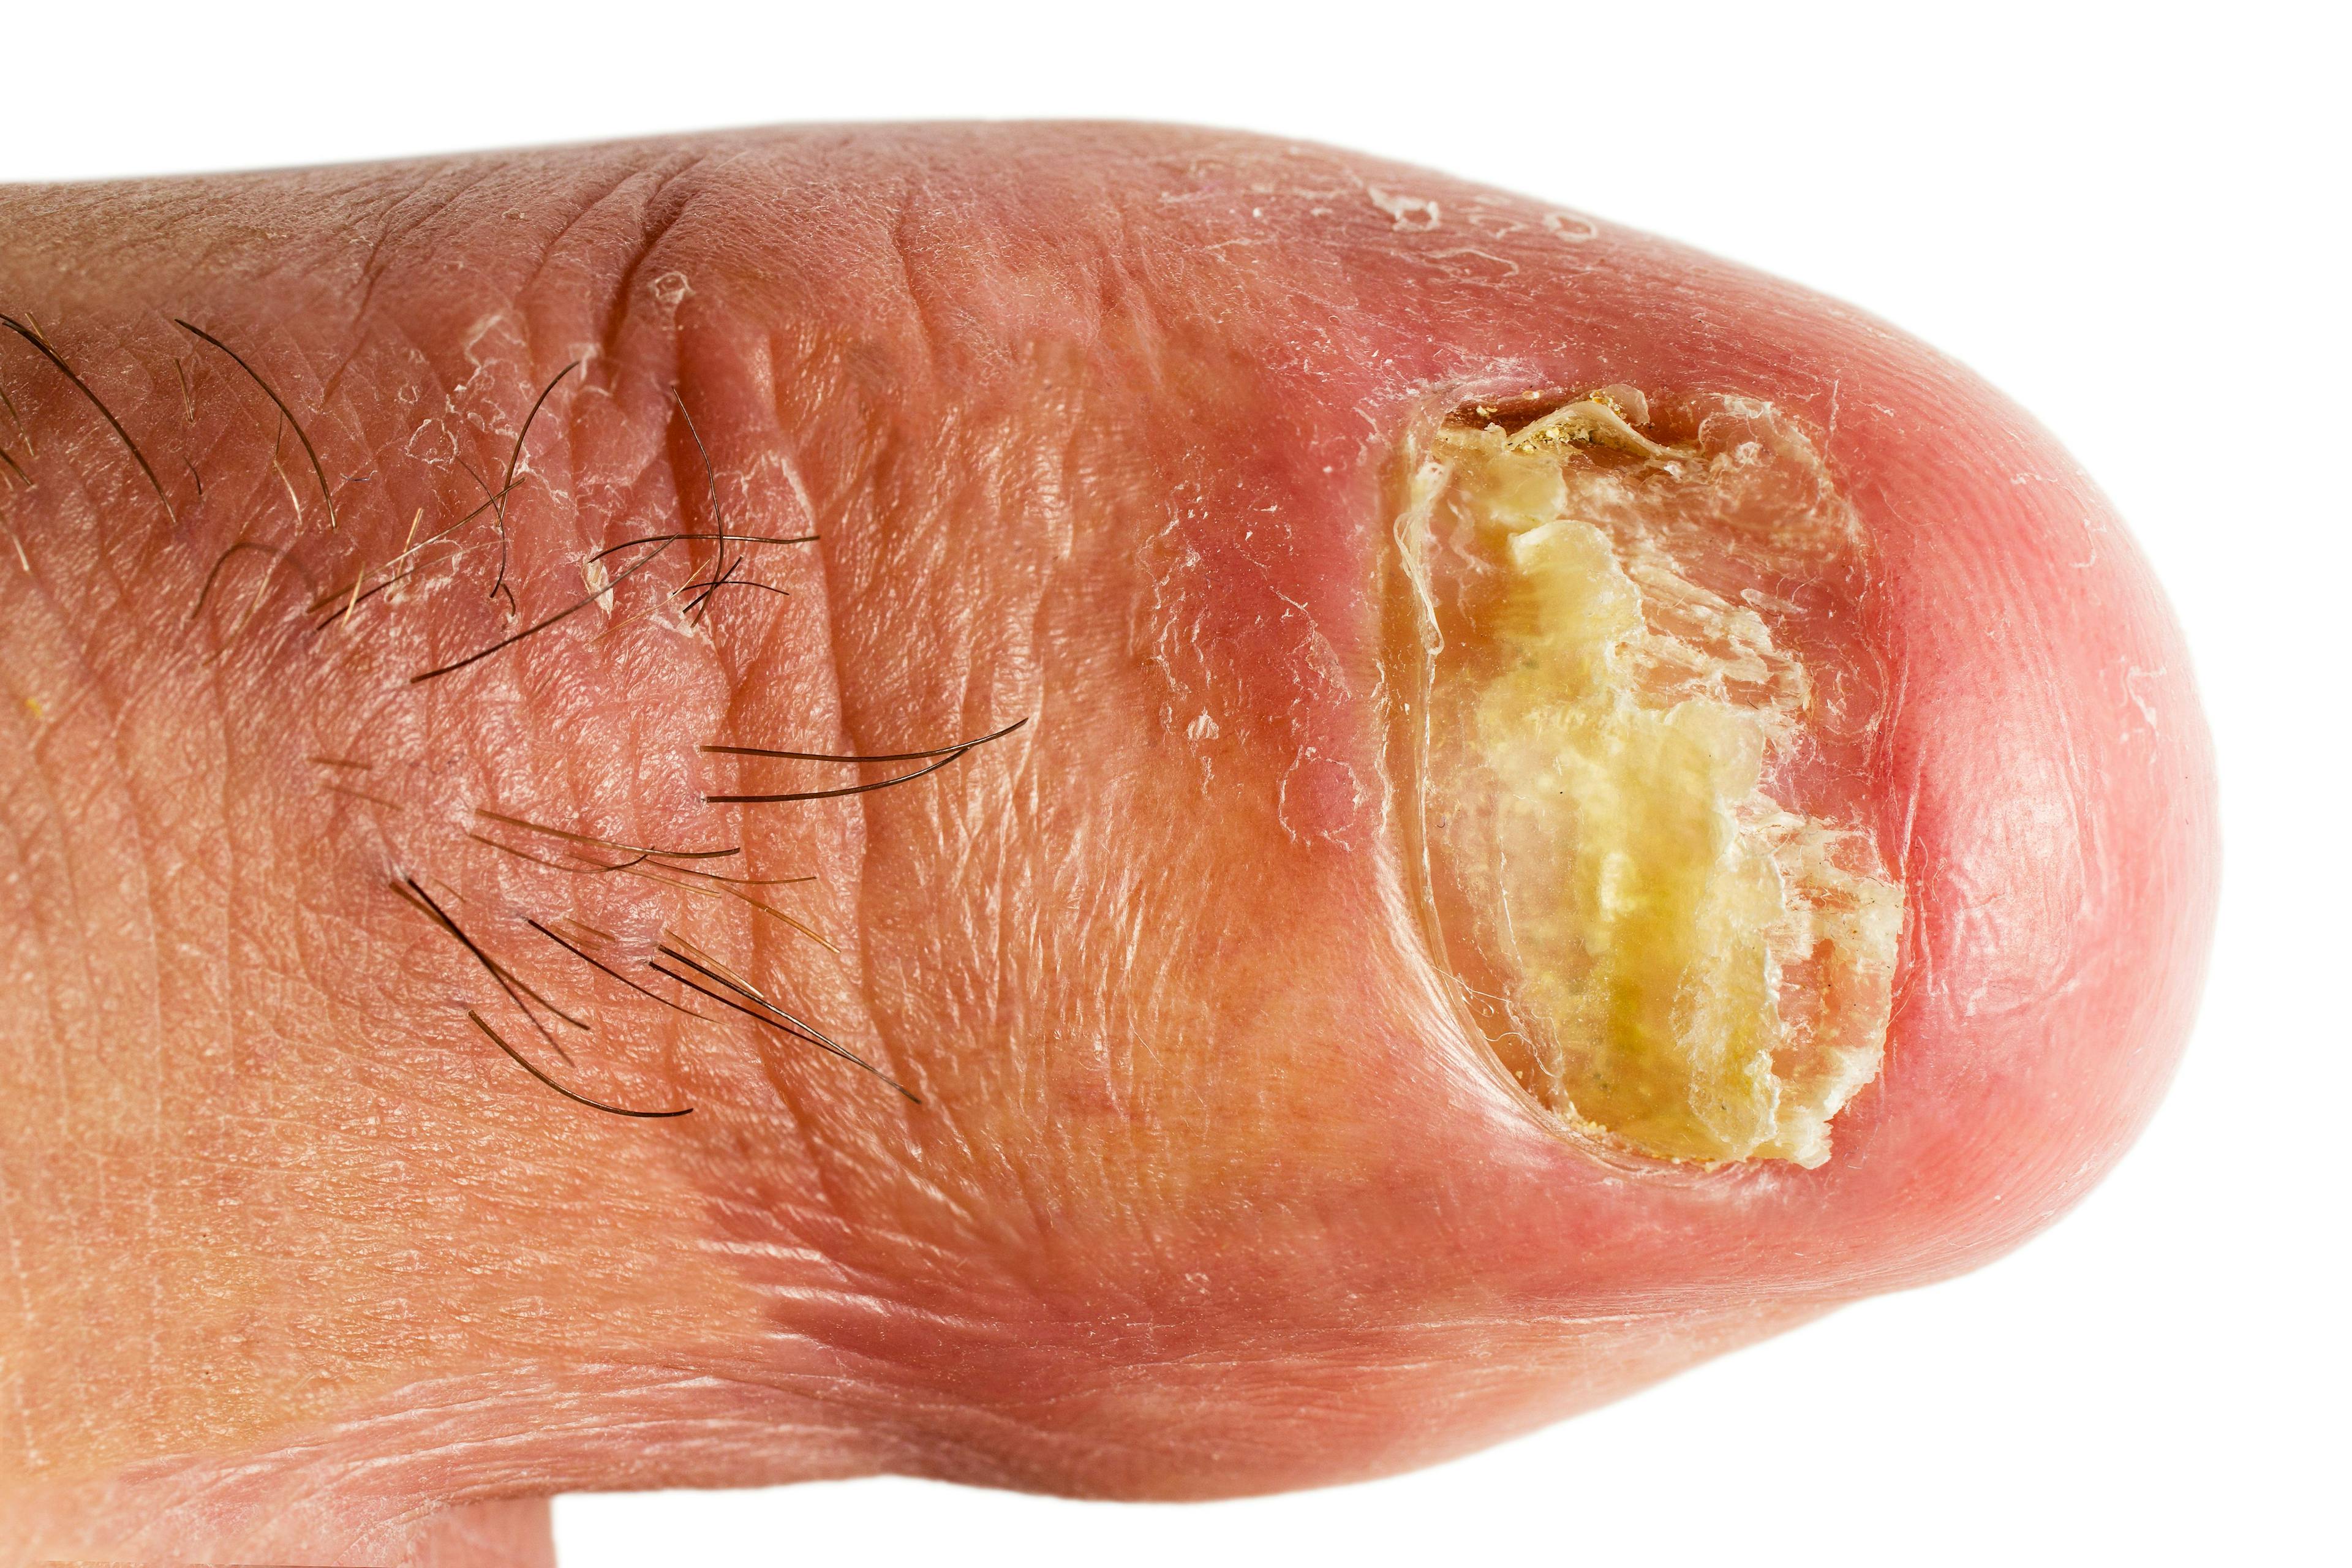 Rising Antifungal Resistance Poses a Threat to Onychomycosis Treatment